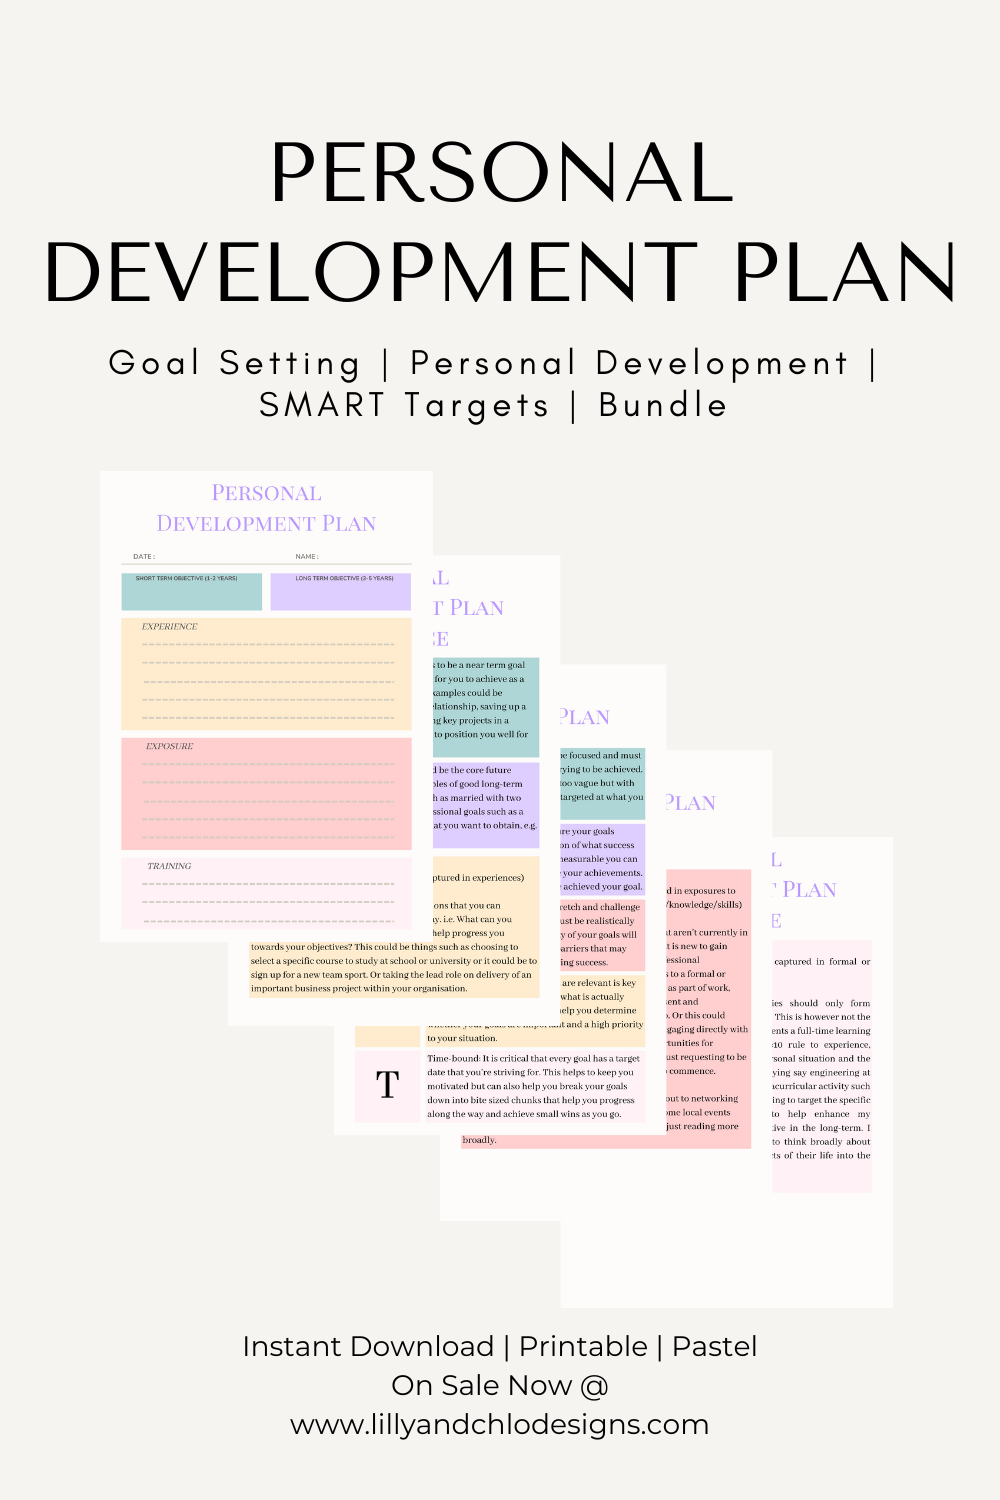 Personal Development Plan - Goal Setting, Personal Development, SMART Targets, Bundle. Image shows a cascade of screenshots of the personal development plan template along with the guidance notes for planning. Instant Download, Printable, Pastel, On sale now at www.lillyandchlodesigns.com